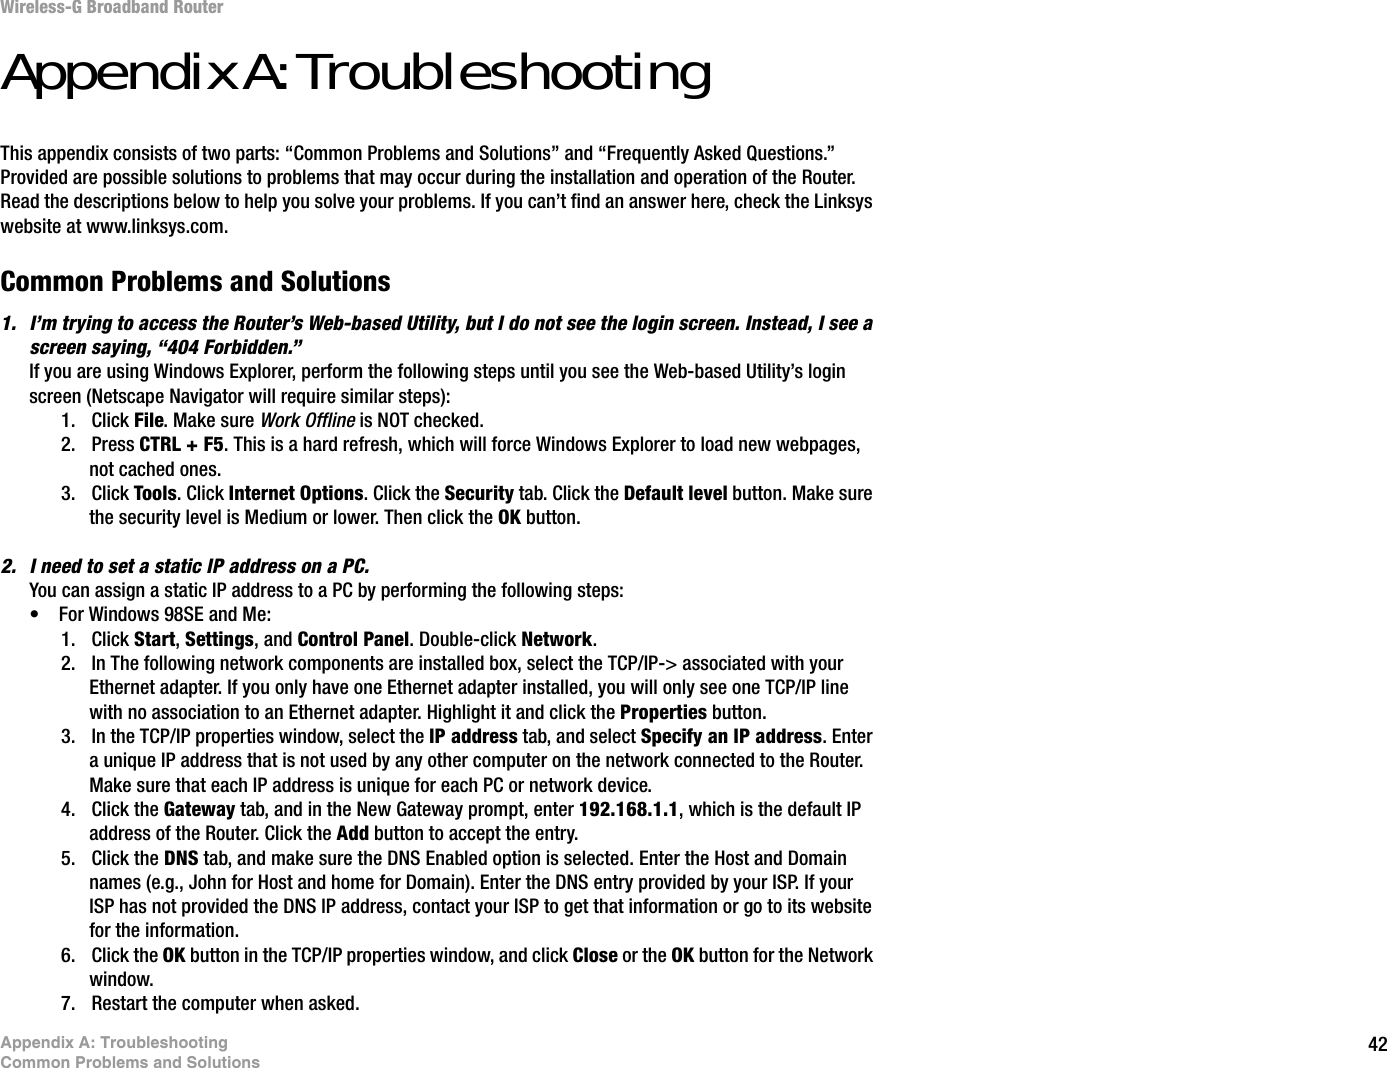 42Appendix A: TroubleshootingCommon Problems and SolutionsWireless-G Broadband RouterAppendix A: TroubleshootingThis appendix consists of two parts: “Common Problems and Solutions” and “Frequently Asked Questions.” Provided are possible solutions to problems that may occur during the installation and operation of the Router. Read the descriptions below to help you solve your problems. If you can’t find an answer here, check the Linksys website at www.linksys.com.Common Problems and Solutions1. I’m trying to access the Router’s Web-based Utility, but I do not see the login screen. Instead, I see a screen saying, “404 Forbidden.”If you are using Windows Explorer, perform the following steps until you see the Web-based Utility’s login screen (Netscape Navigator will require similar steps):1. Click File. Make sure Work Offline is NOT checked.2. Press CTRL + F5. This is a hard refresh, which will force Windows Explorer to load new webpages, not cached ones.3. Click Tools. Click Internet Options. Click the Security tab. Click the Default level button. Make sure the security level is Medium or lower. Then click the OK button.2. I need to set a static IP address on a PC.You can assign a static IP address to a PC by performing the following steps:• For Windows 98SE and Me:1. Click Start,Settings, and Control Panel. Double-click Network.2. In The following network components are installed box, select the TCP/IP-&gt; associated with your Ethernet adapter. If you only have one Ethernet adapter installed, you will only see one TCP/IP line with no association to an Ethernet adapter. Highlight it and click the Properties button.3. In the TCP/IP properties window, select the IP address tab, and select Specify an IP address. Enter a unique IP address that is not used by any other computer on the network connected to the Router. Make sure that each IP address is unique for each PC or network device.4. Click the Gateway tab, and in the New Gateway prompt, enter 192.168.1.1, which is the default IP address of the Router. Click the Add button to accept the entry.5. Click the DNS tab, and make sure the DNS Enabled option is selected. Enter the Host and Domain names (e.g., John for Host and home for Domain). Enter the DNS entry provided by your ISP. If your ISP has not provided the DNS IP address, contact your ISP to get that information or go to its website for the information.6. Click the OK button in the TCP/IP properties window, and click Close or the OK button for the Network window.7. Restart the computer when asked.